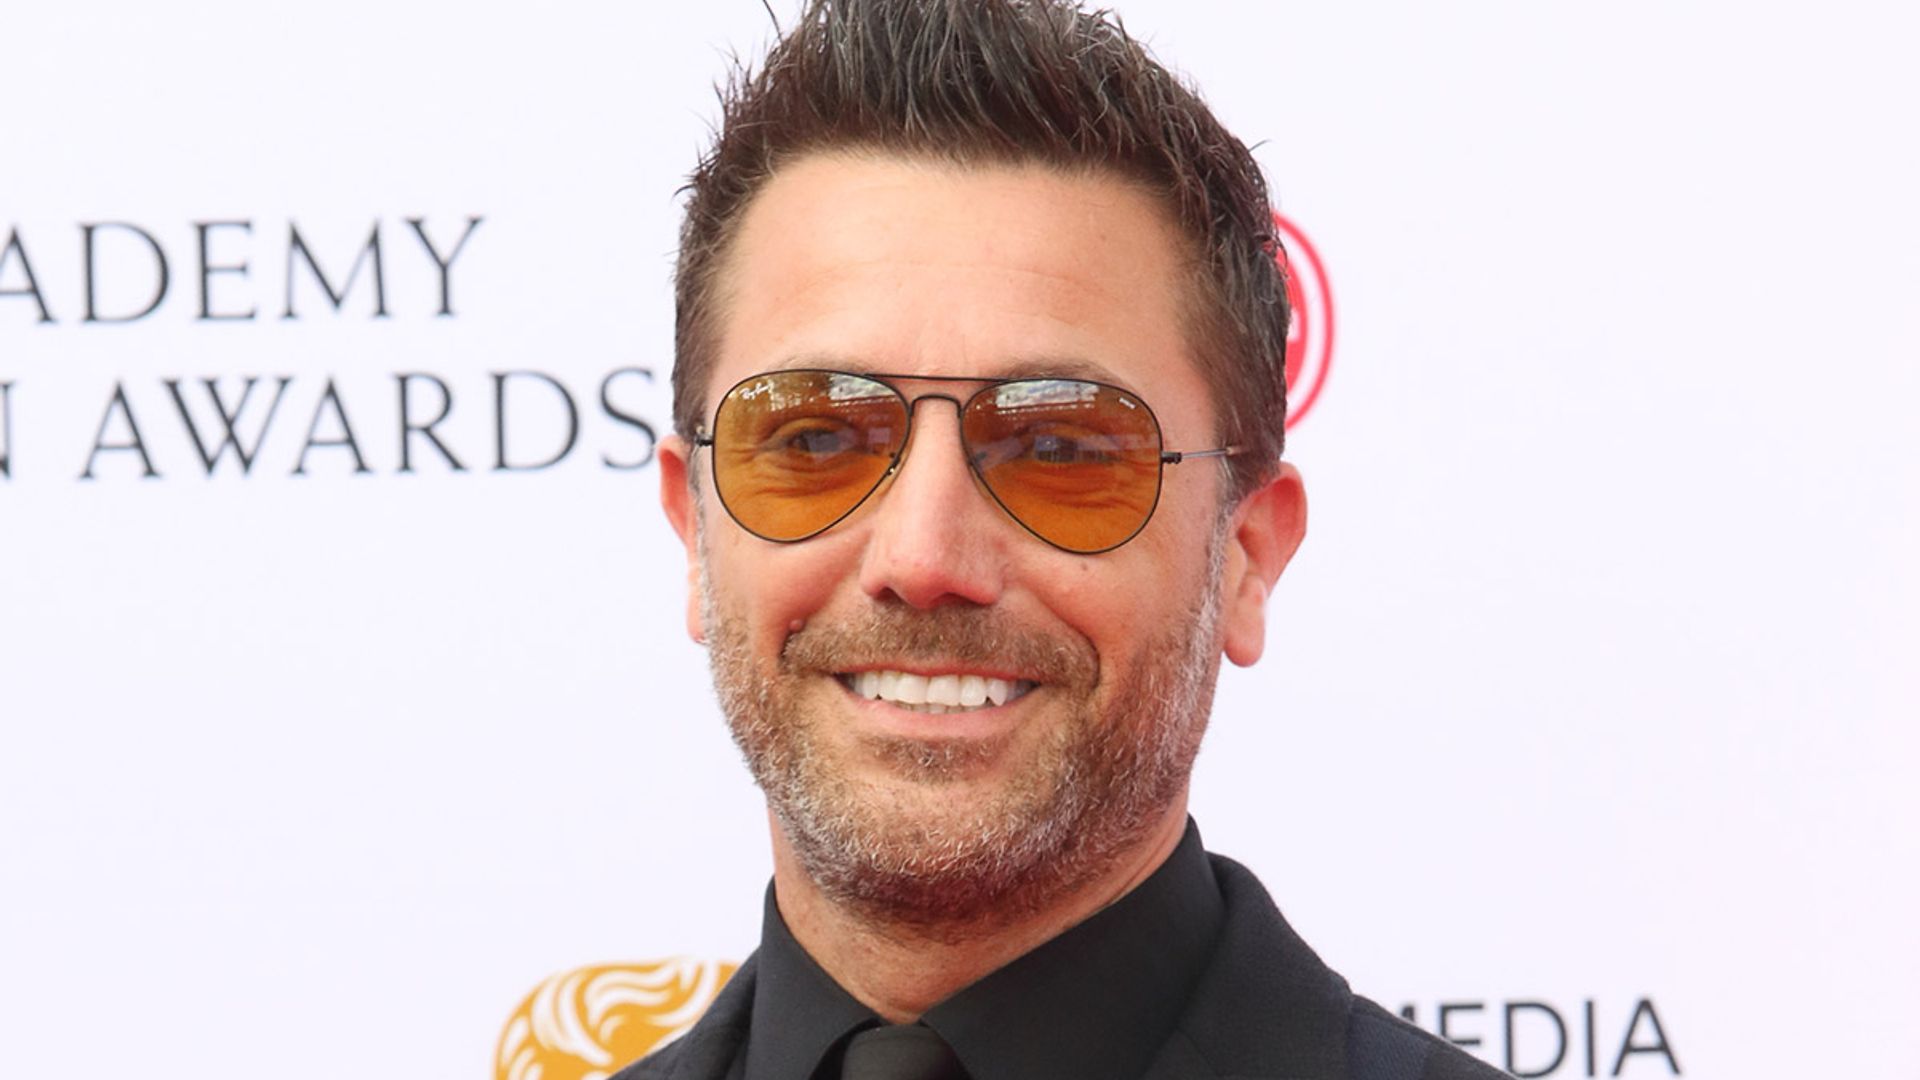 Gino D'Acampo inundated with support after sharing a photo kissing his daughter